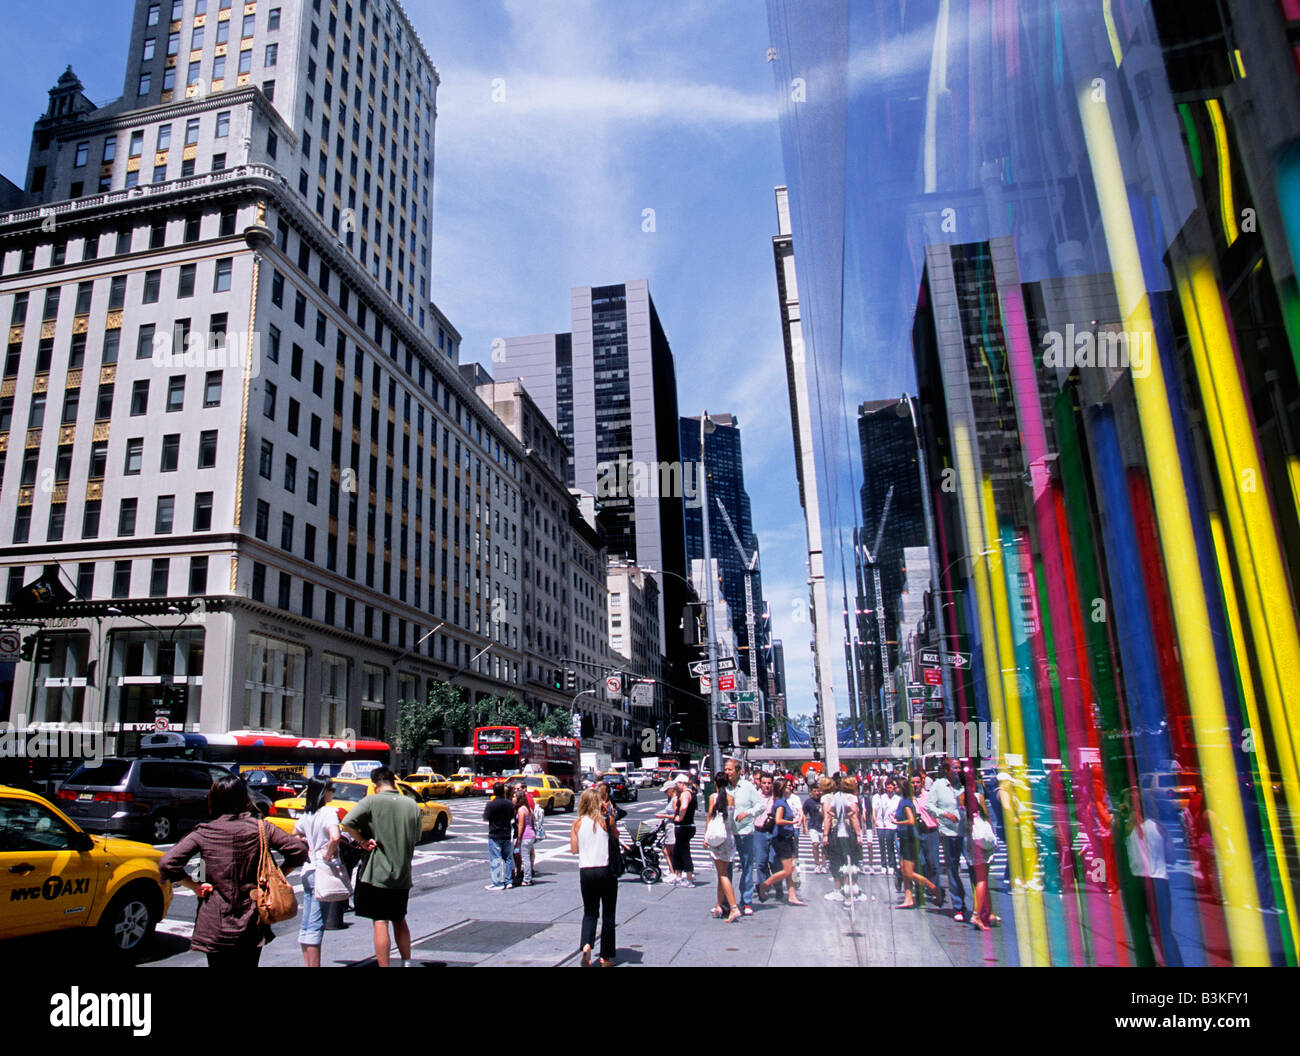 New York City Corner of Fifth Avenue and 57th Street on a busy day with crowds of tourists and shoppers. Stock Photo